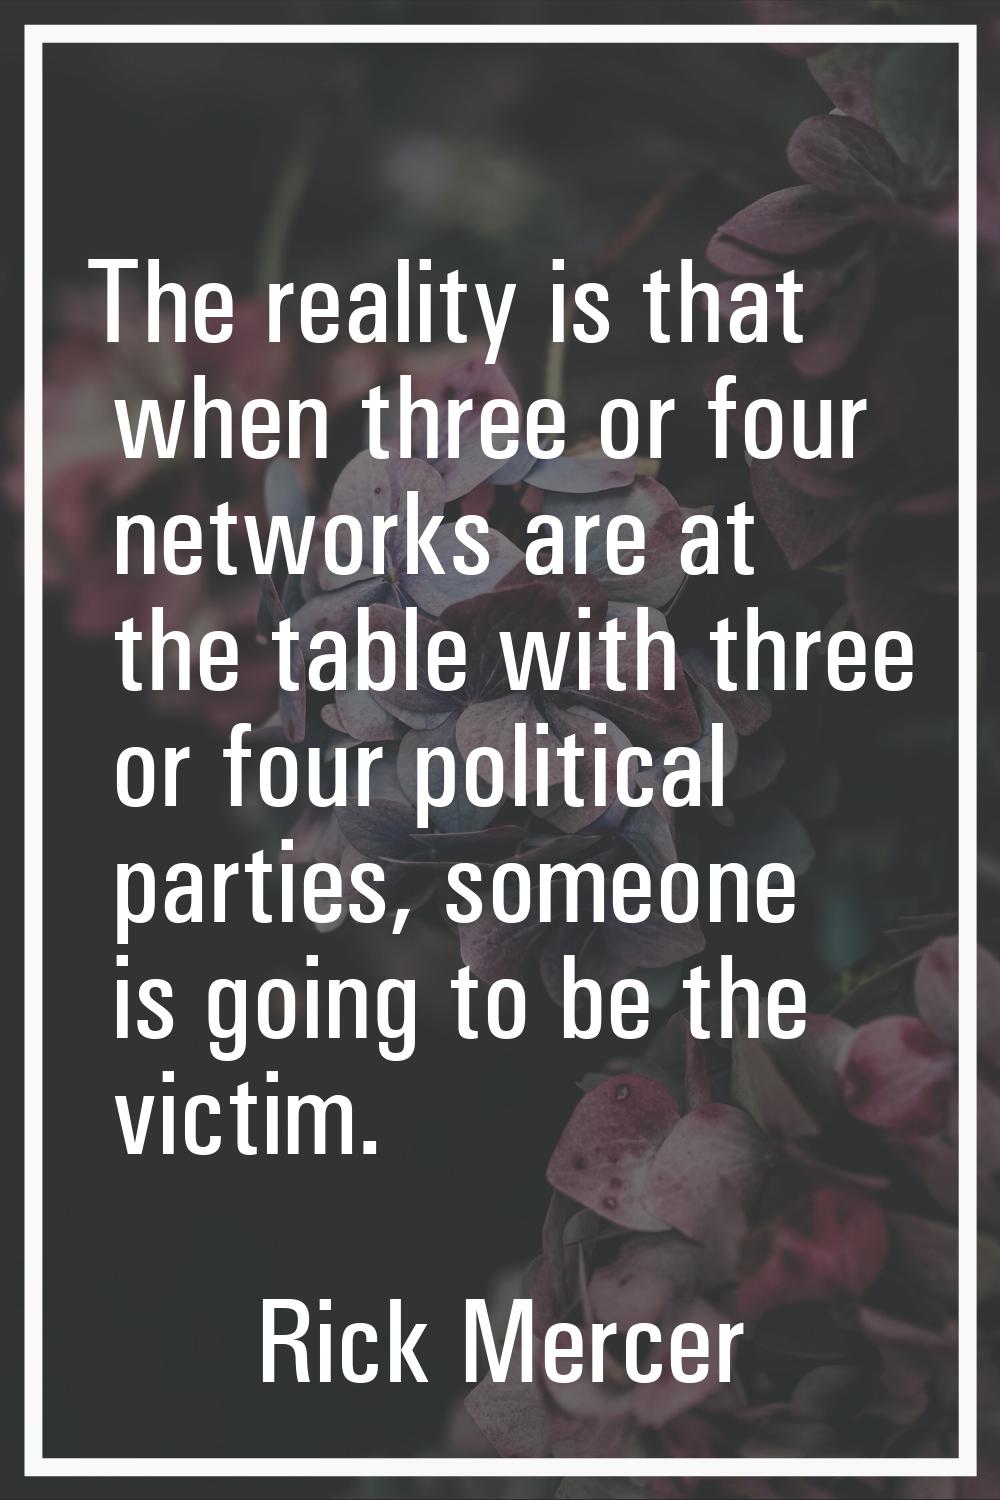 The reality is that when three or four networks are at the table with three or four political parti